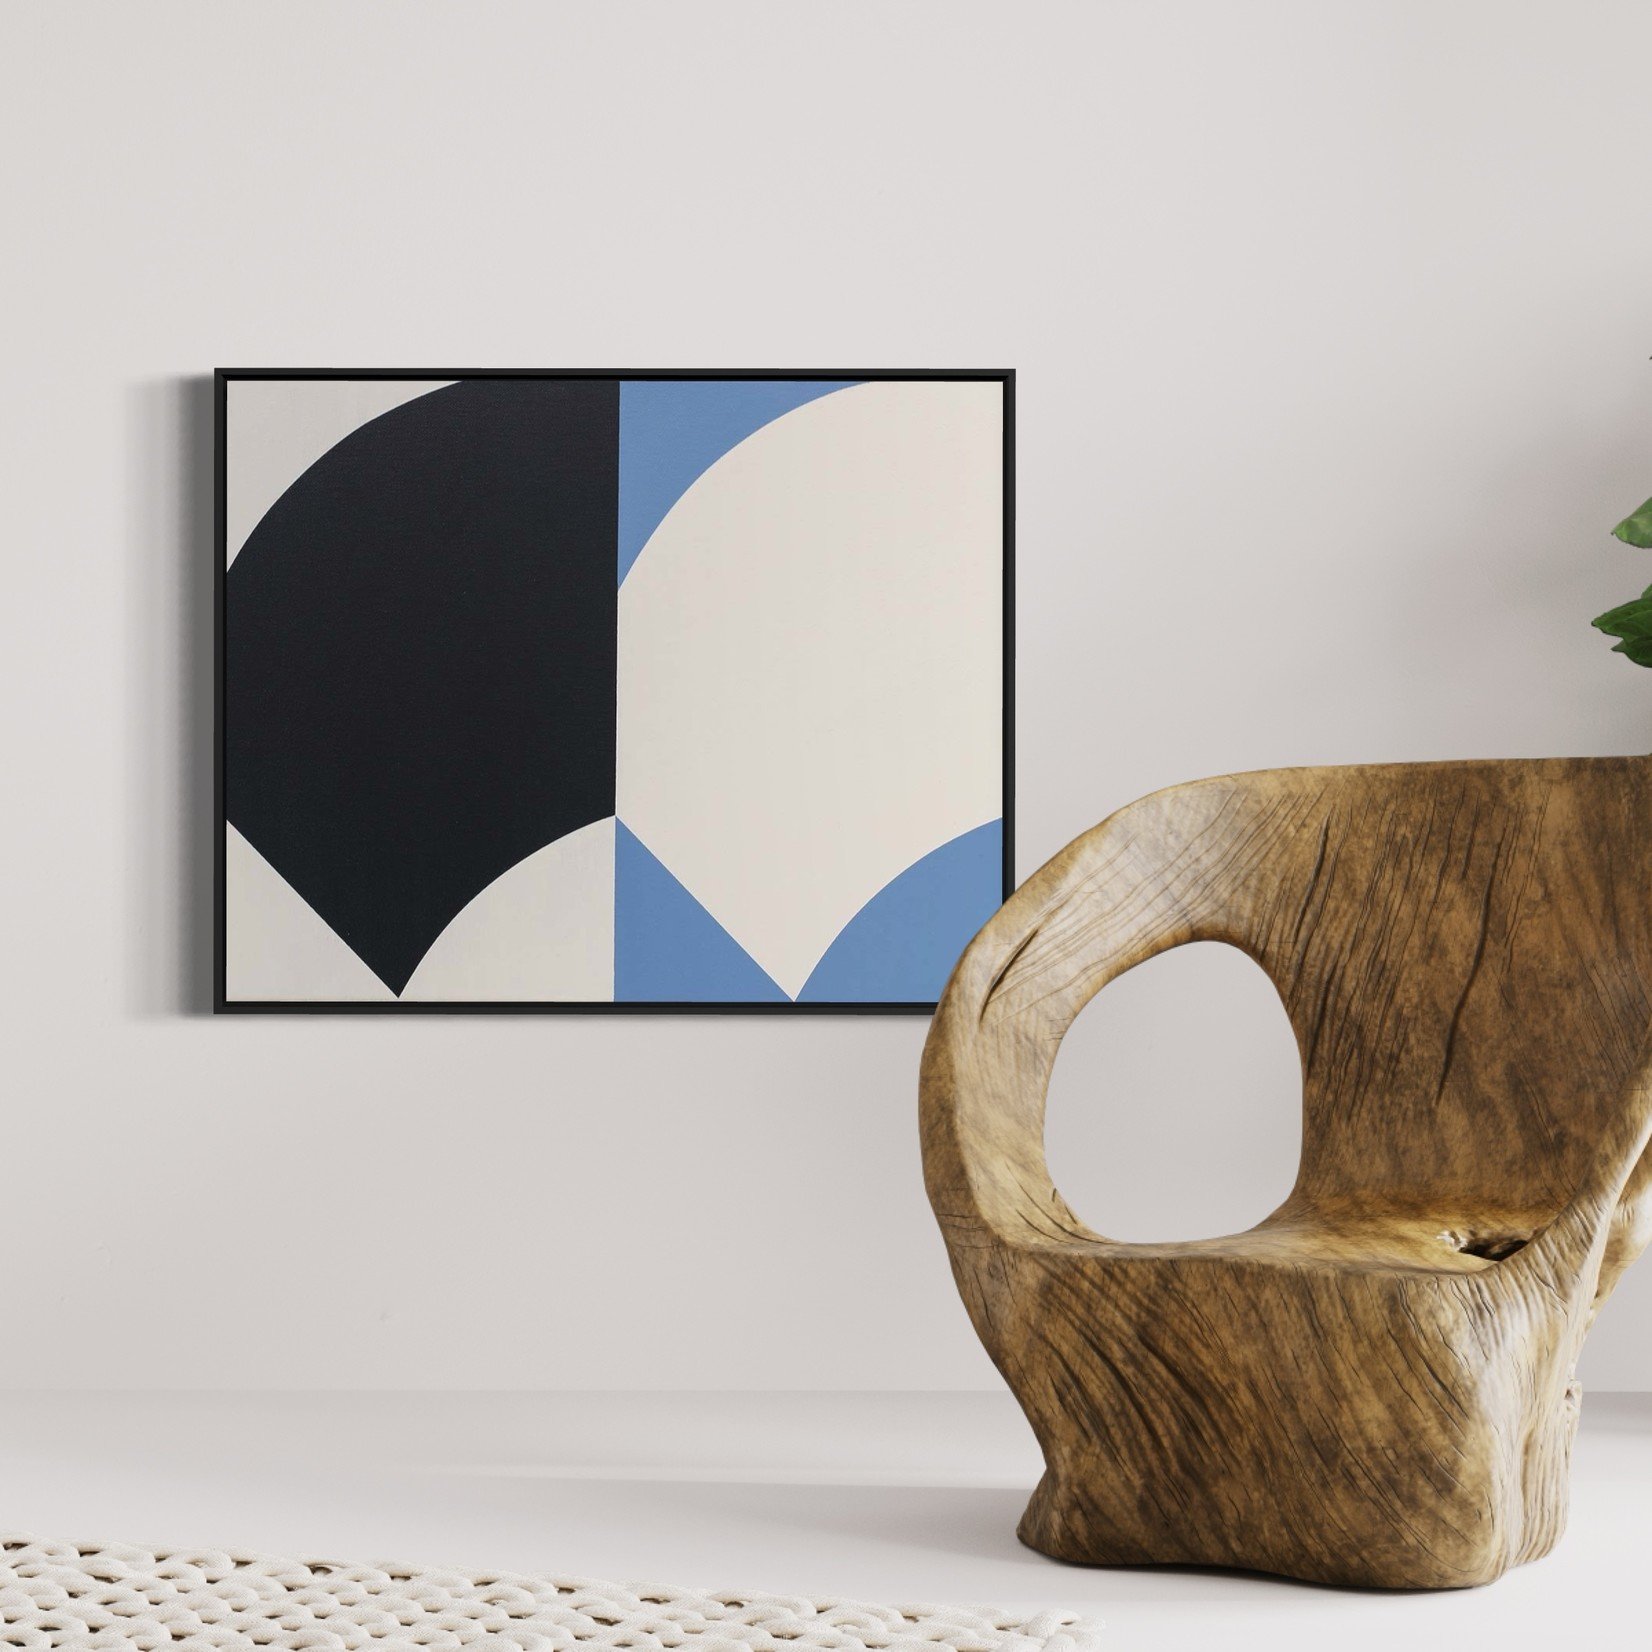 Stretched Print on Canvas Double Curve by Rodrigo Martin